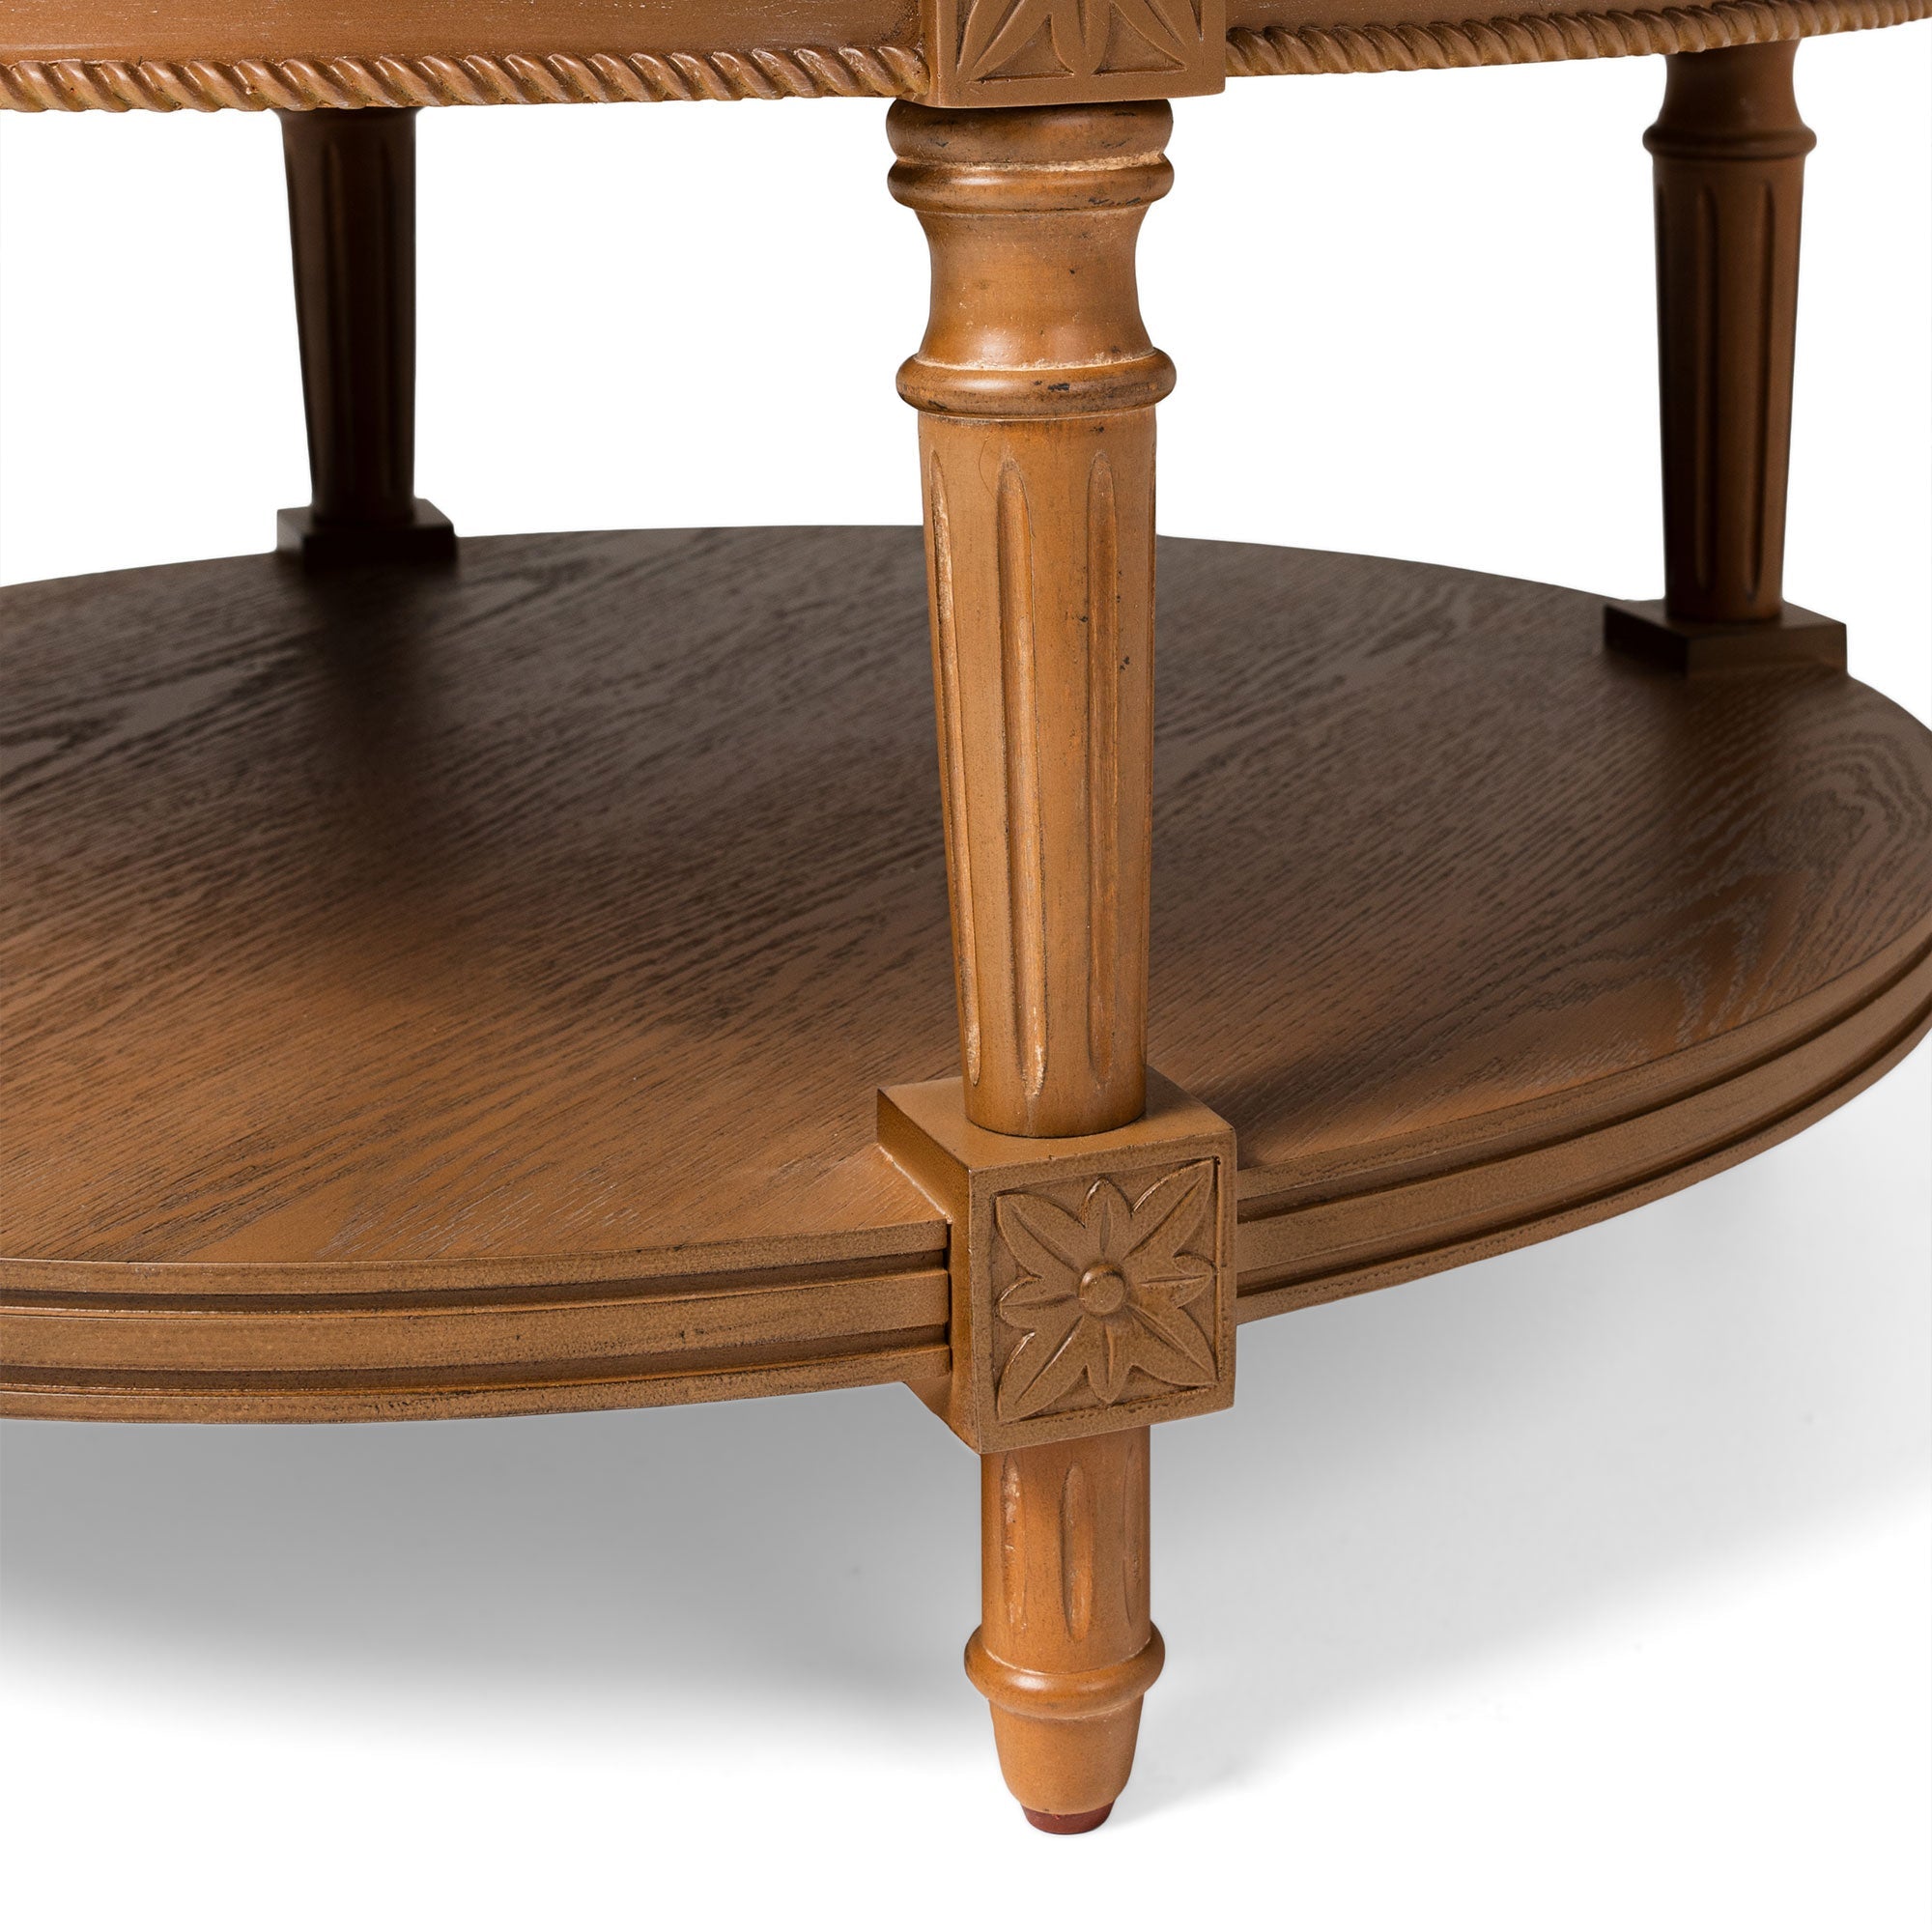 Pullman Traditional Round Wooden Coffee Table in Antiqued Natural Finish in Accent Tables by Maven Lane